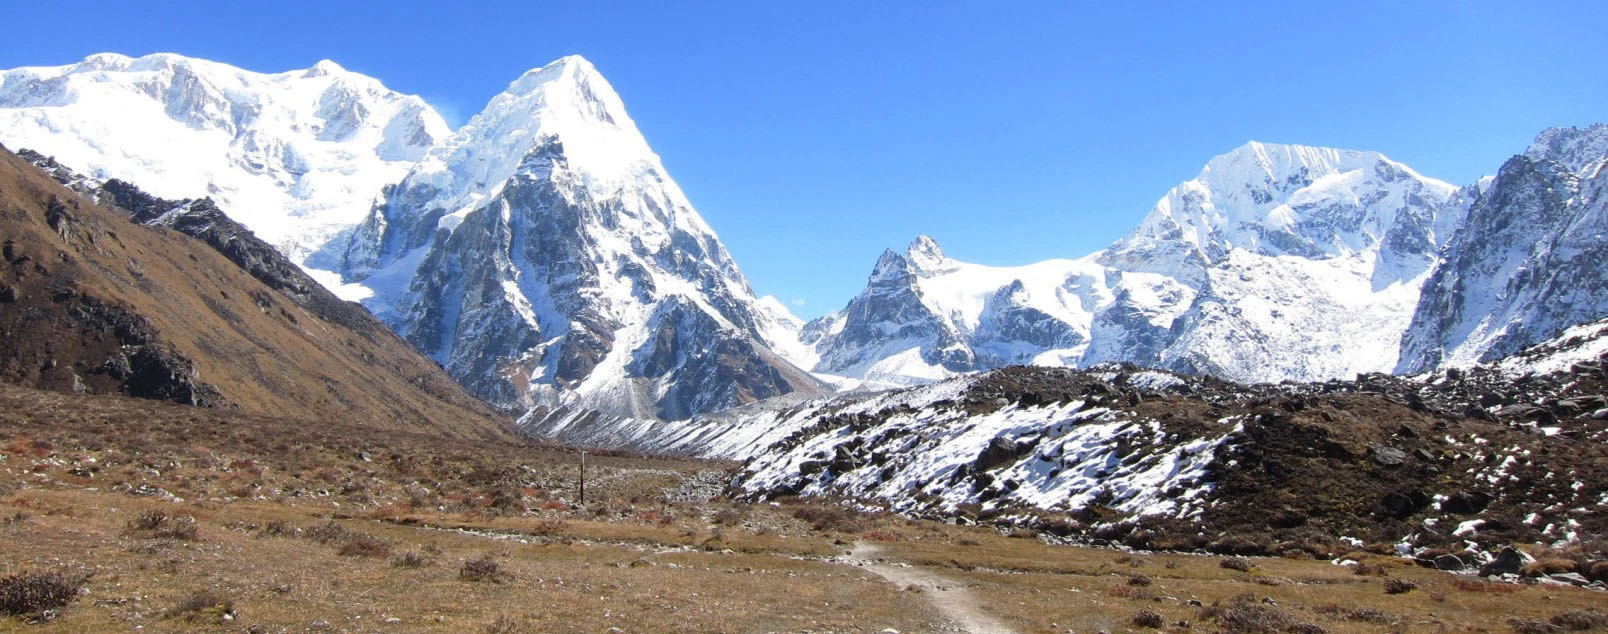 The attraction of the Kanchenjunga Trekking in Nepal